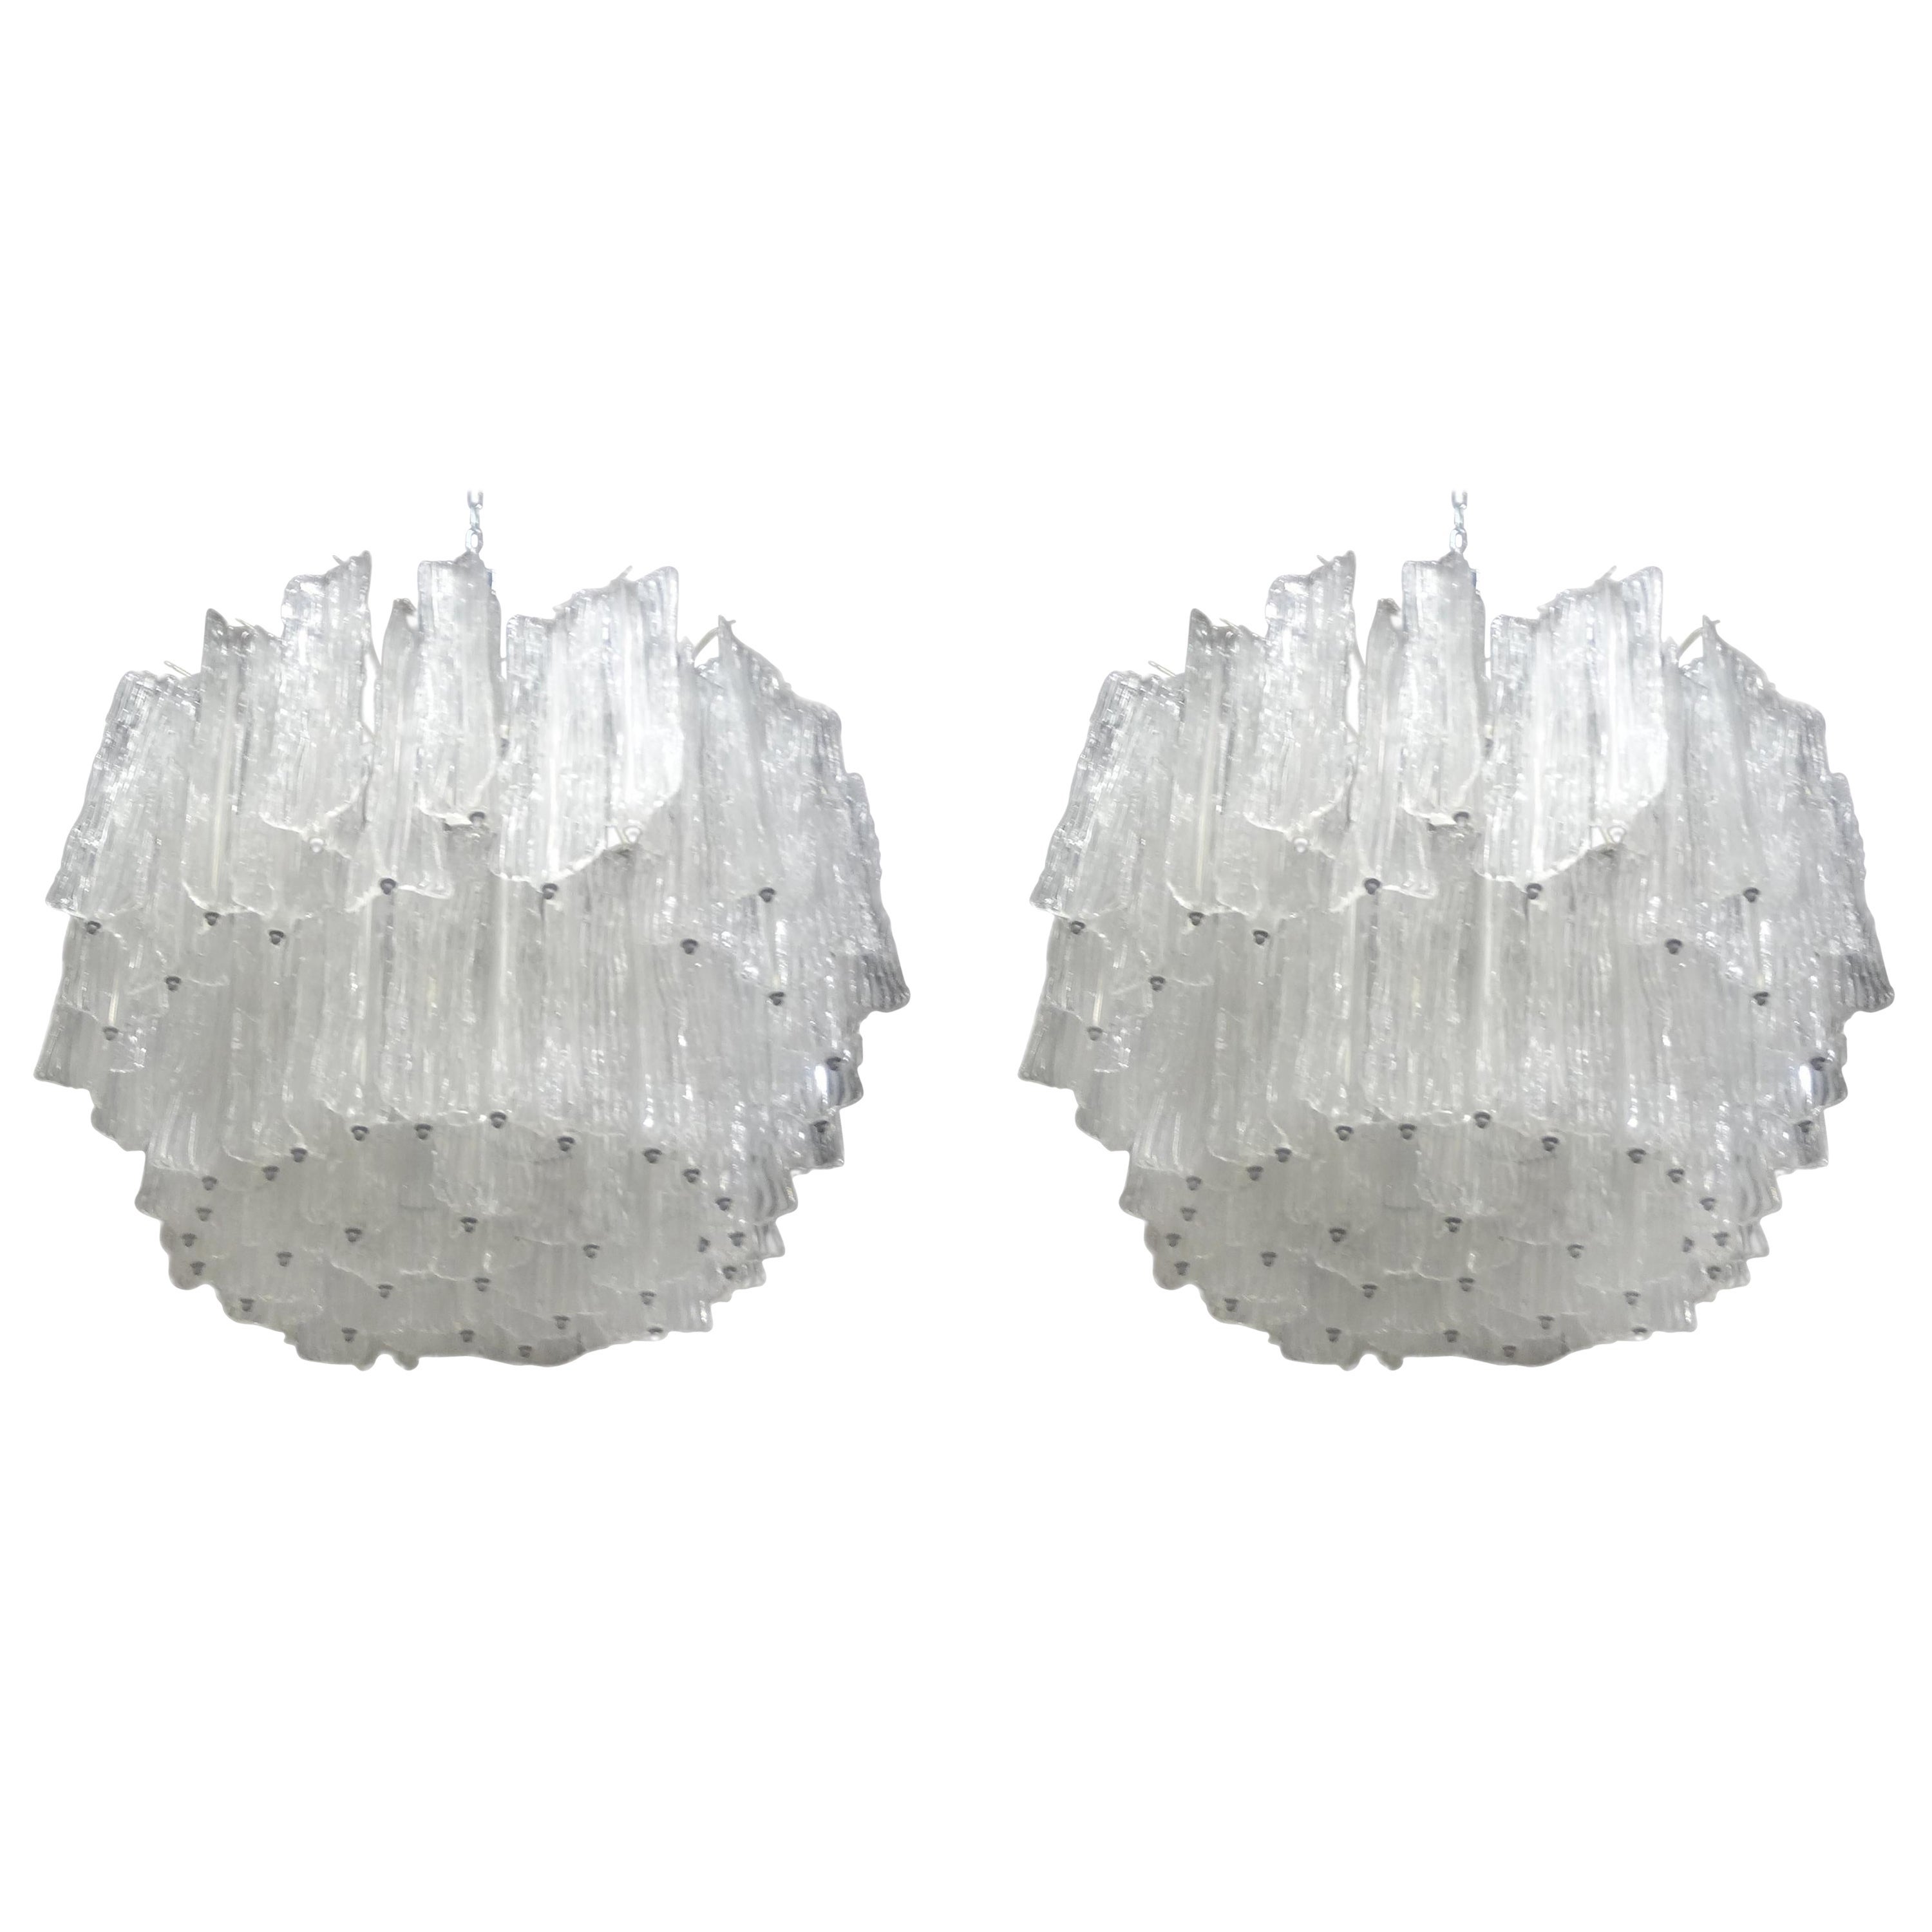 Pair of Large Mid-Century Modern Italian Murano Chandeliers Attributed to Venini For Sale